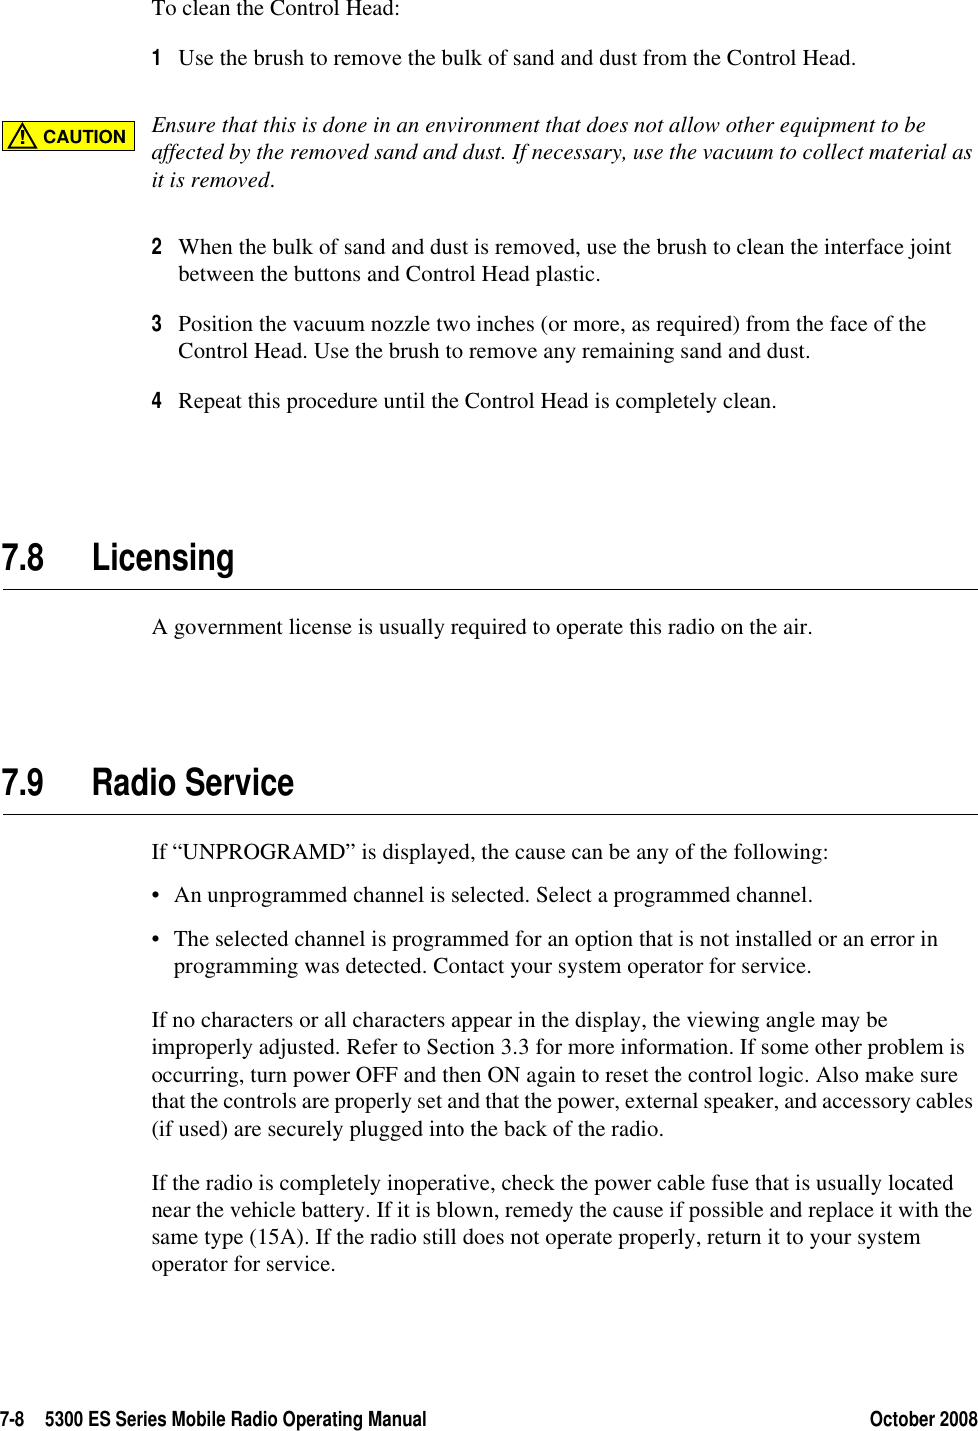 7-8 5300 ES Series Mobile Radio Operating Manual October 2008To clean the Control Head:1Use the brush to remove the bulk of sand and dust from the Control Head.Ensure that this is done in an environment that does not allow other equipment to be affected by the removed sand and dust. If necessary, use the vacuum to collect material as it is removed.2When the bulk of sand and dust is removed, use the brush to clean the interface joint between the buttons and Control Head plastic.3Position the vacuum nozzle two inches (or more, as required) from the face of the Control Head. Use the brush to remove any remaining sand and dust.4Repeat this procedure until the Control Head is completely clean.7.8 LicensingA government license is usually required to operate this radio on the air.7.9 Radio Service If “UNPROGRAMD” is displayed, the cause can be any of the following:• An unprogrammed channel is selected. Select a programmed channel.• The selected channel is programmed for an option that is not installed or an error in programming was detected. Contact your system operator for service.If no characters or all characters appear in the display, the viewing angle may be improperly adjusted. Refer to Section 3.3 for more information. If some other problem is occurring, turn power OFF and then ON again to reset the control logic. Also make sure that the controls are properly set and that the power, external speaker, and accessory cables (if used) are securely plugged into the back of the radio.If the radio is completely inoperative, check the power cable fuse that is usually located near the vehicle battery. If it is blown, remedy the cause if possible and replace it with the same type (15A). If the radio still does not operate properly, return it to your system operator for service.CAUTION!